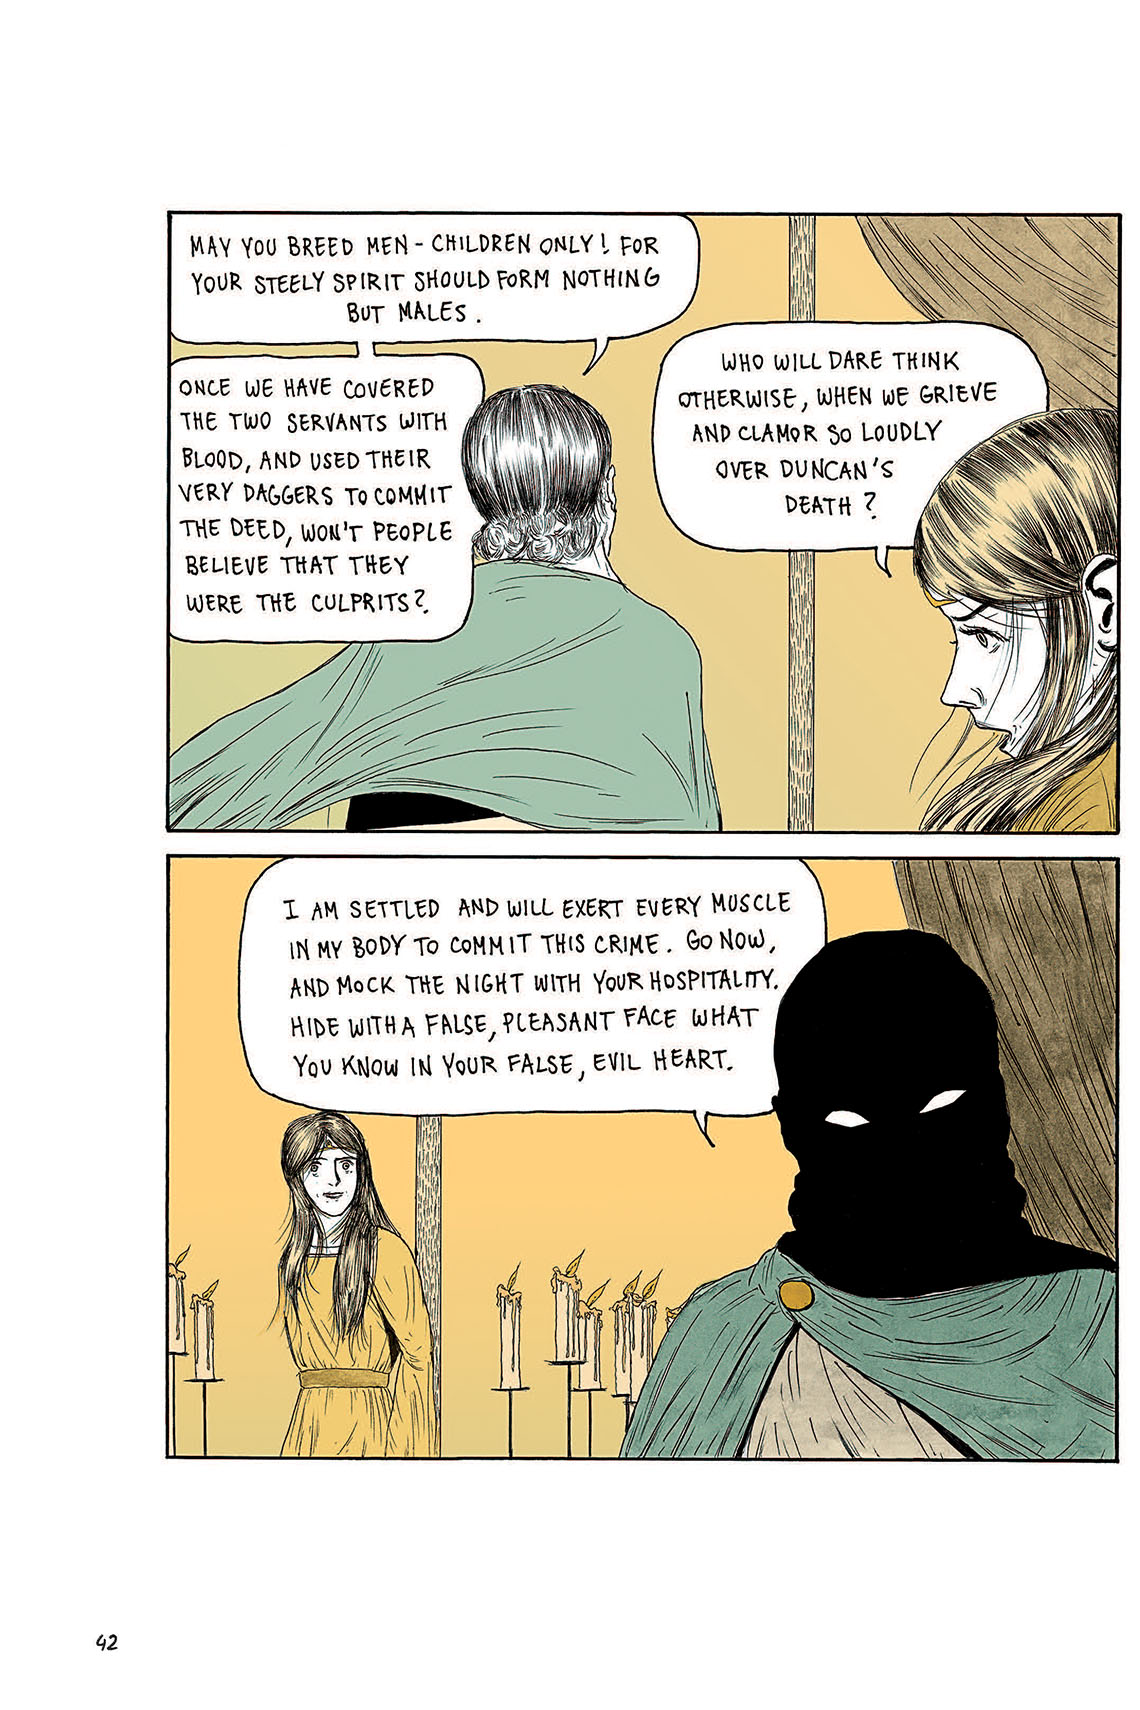 Macbeth Act 1 Scene 7 Page 42 Graphic Novel SparkNotes